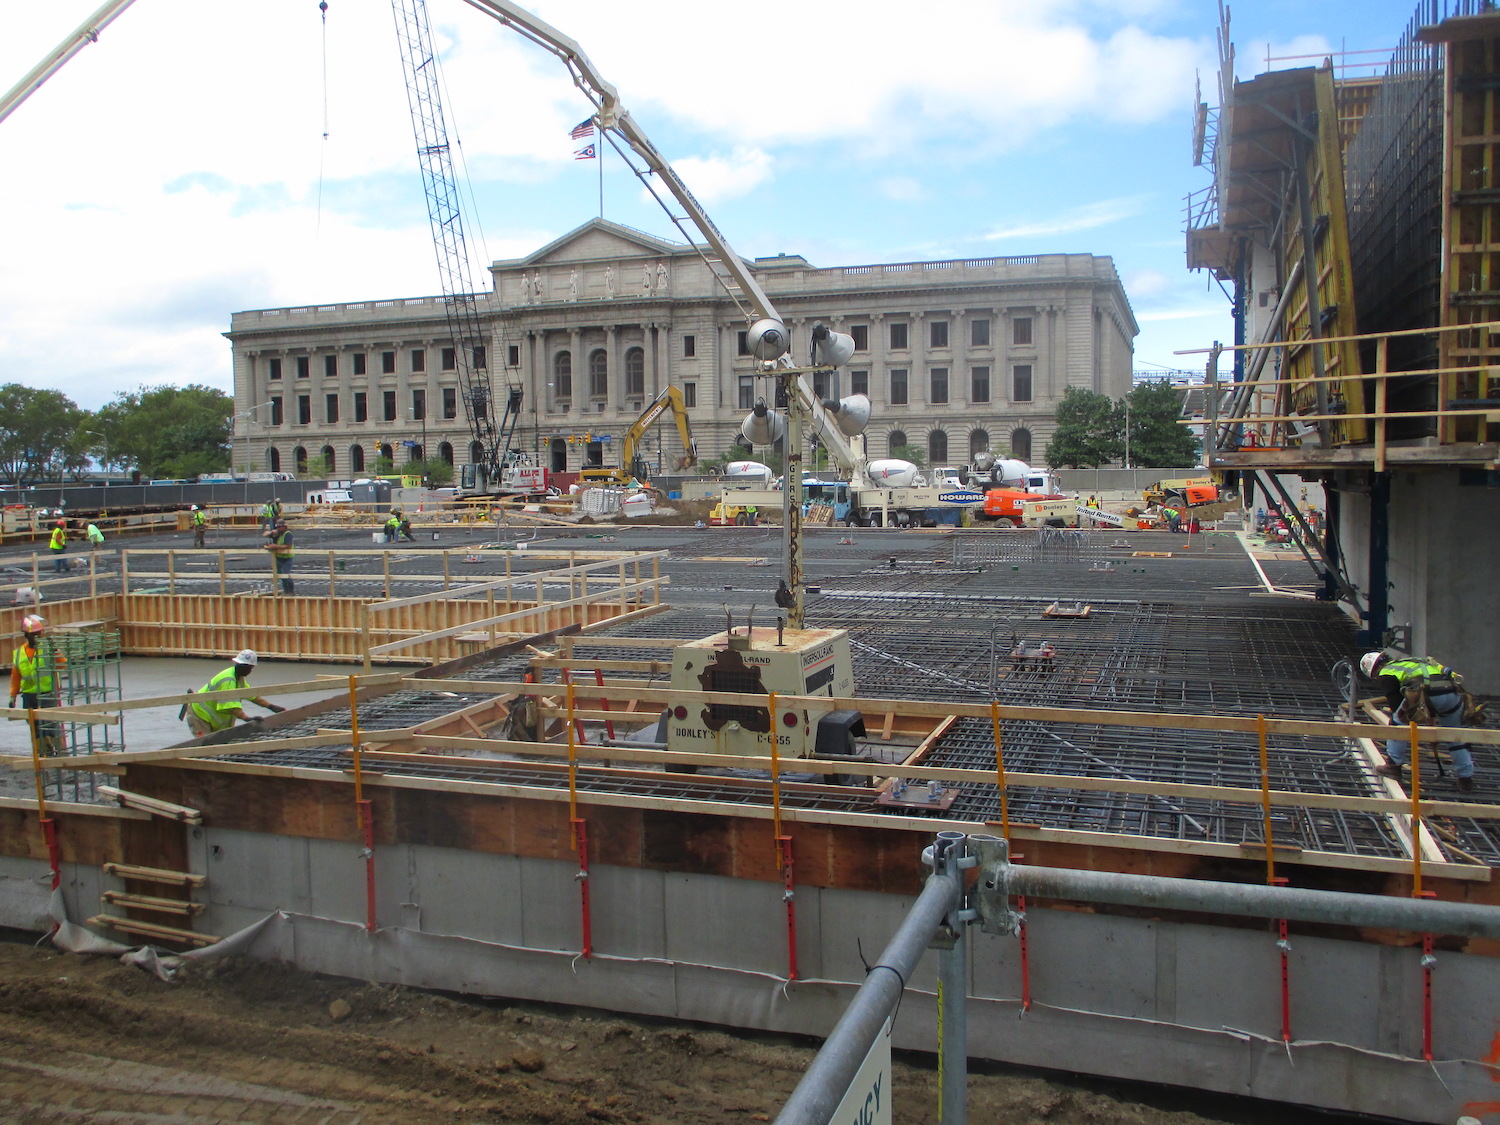 The beginning process of the Hilton Hotel process includes the construction workers laying the metal framing before pouring.